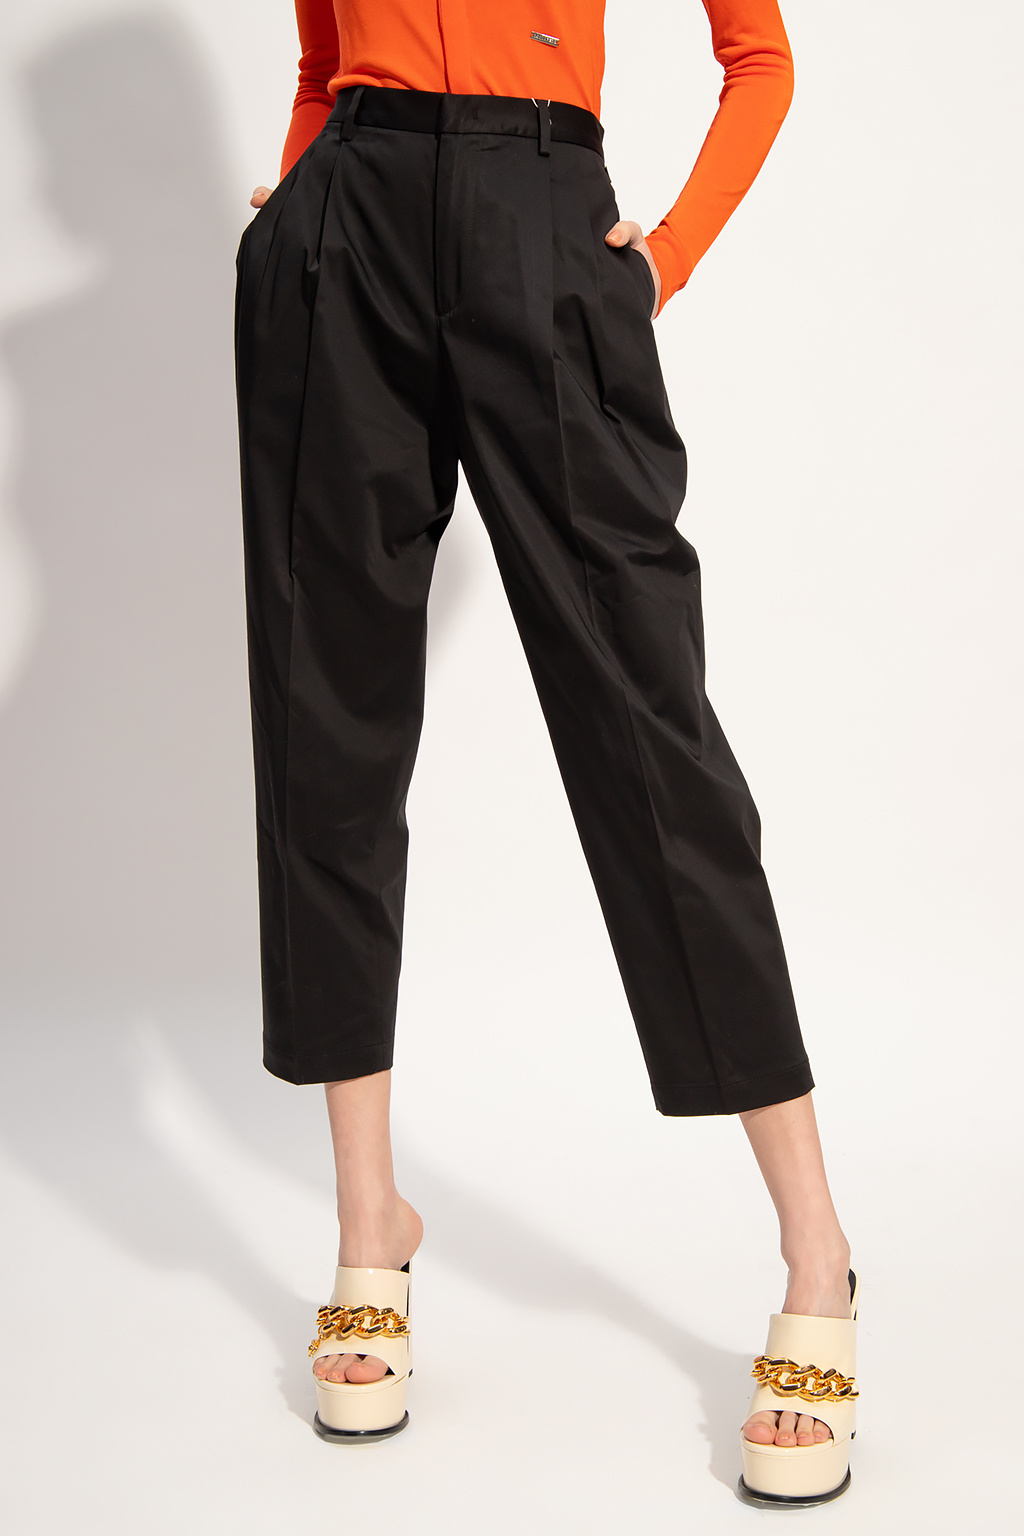 Highwaist trousers with darts